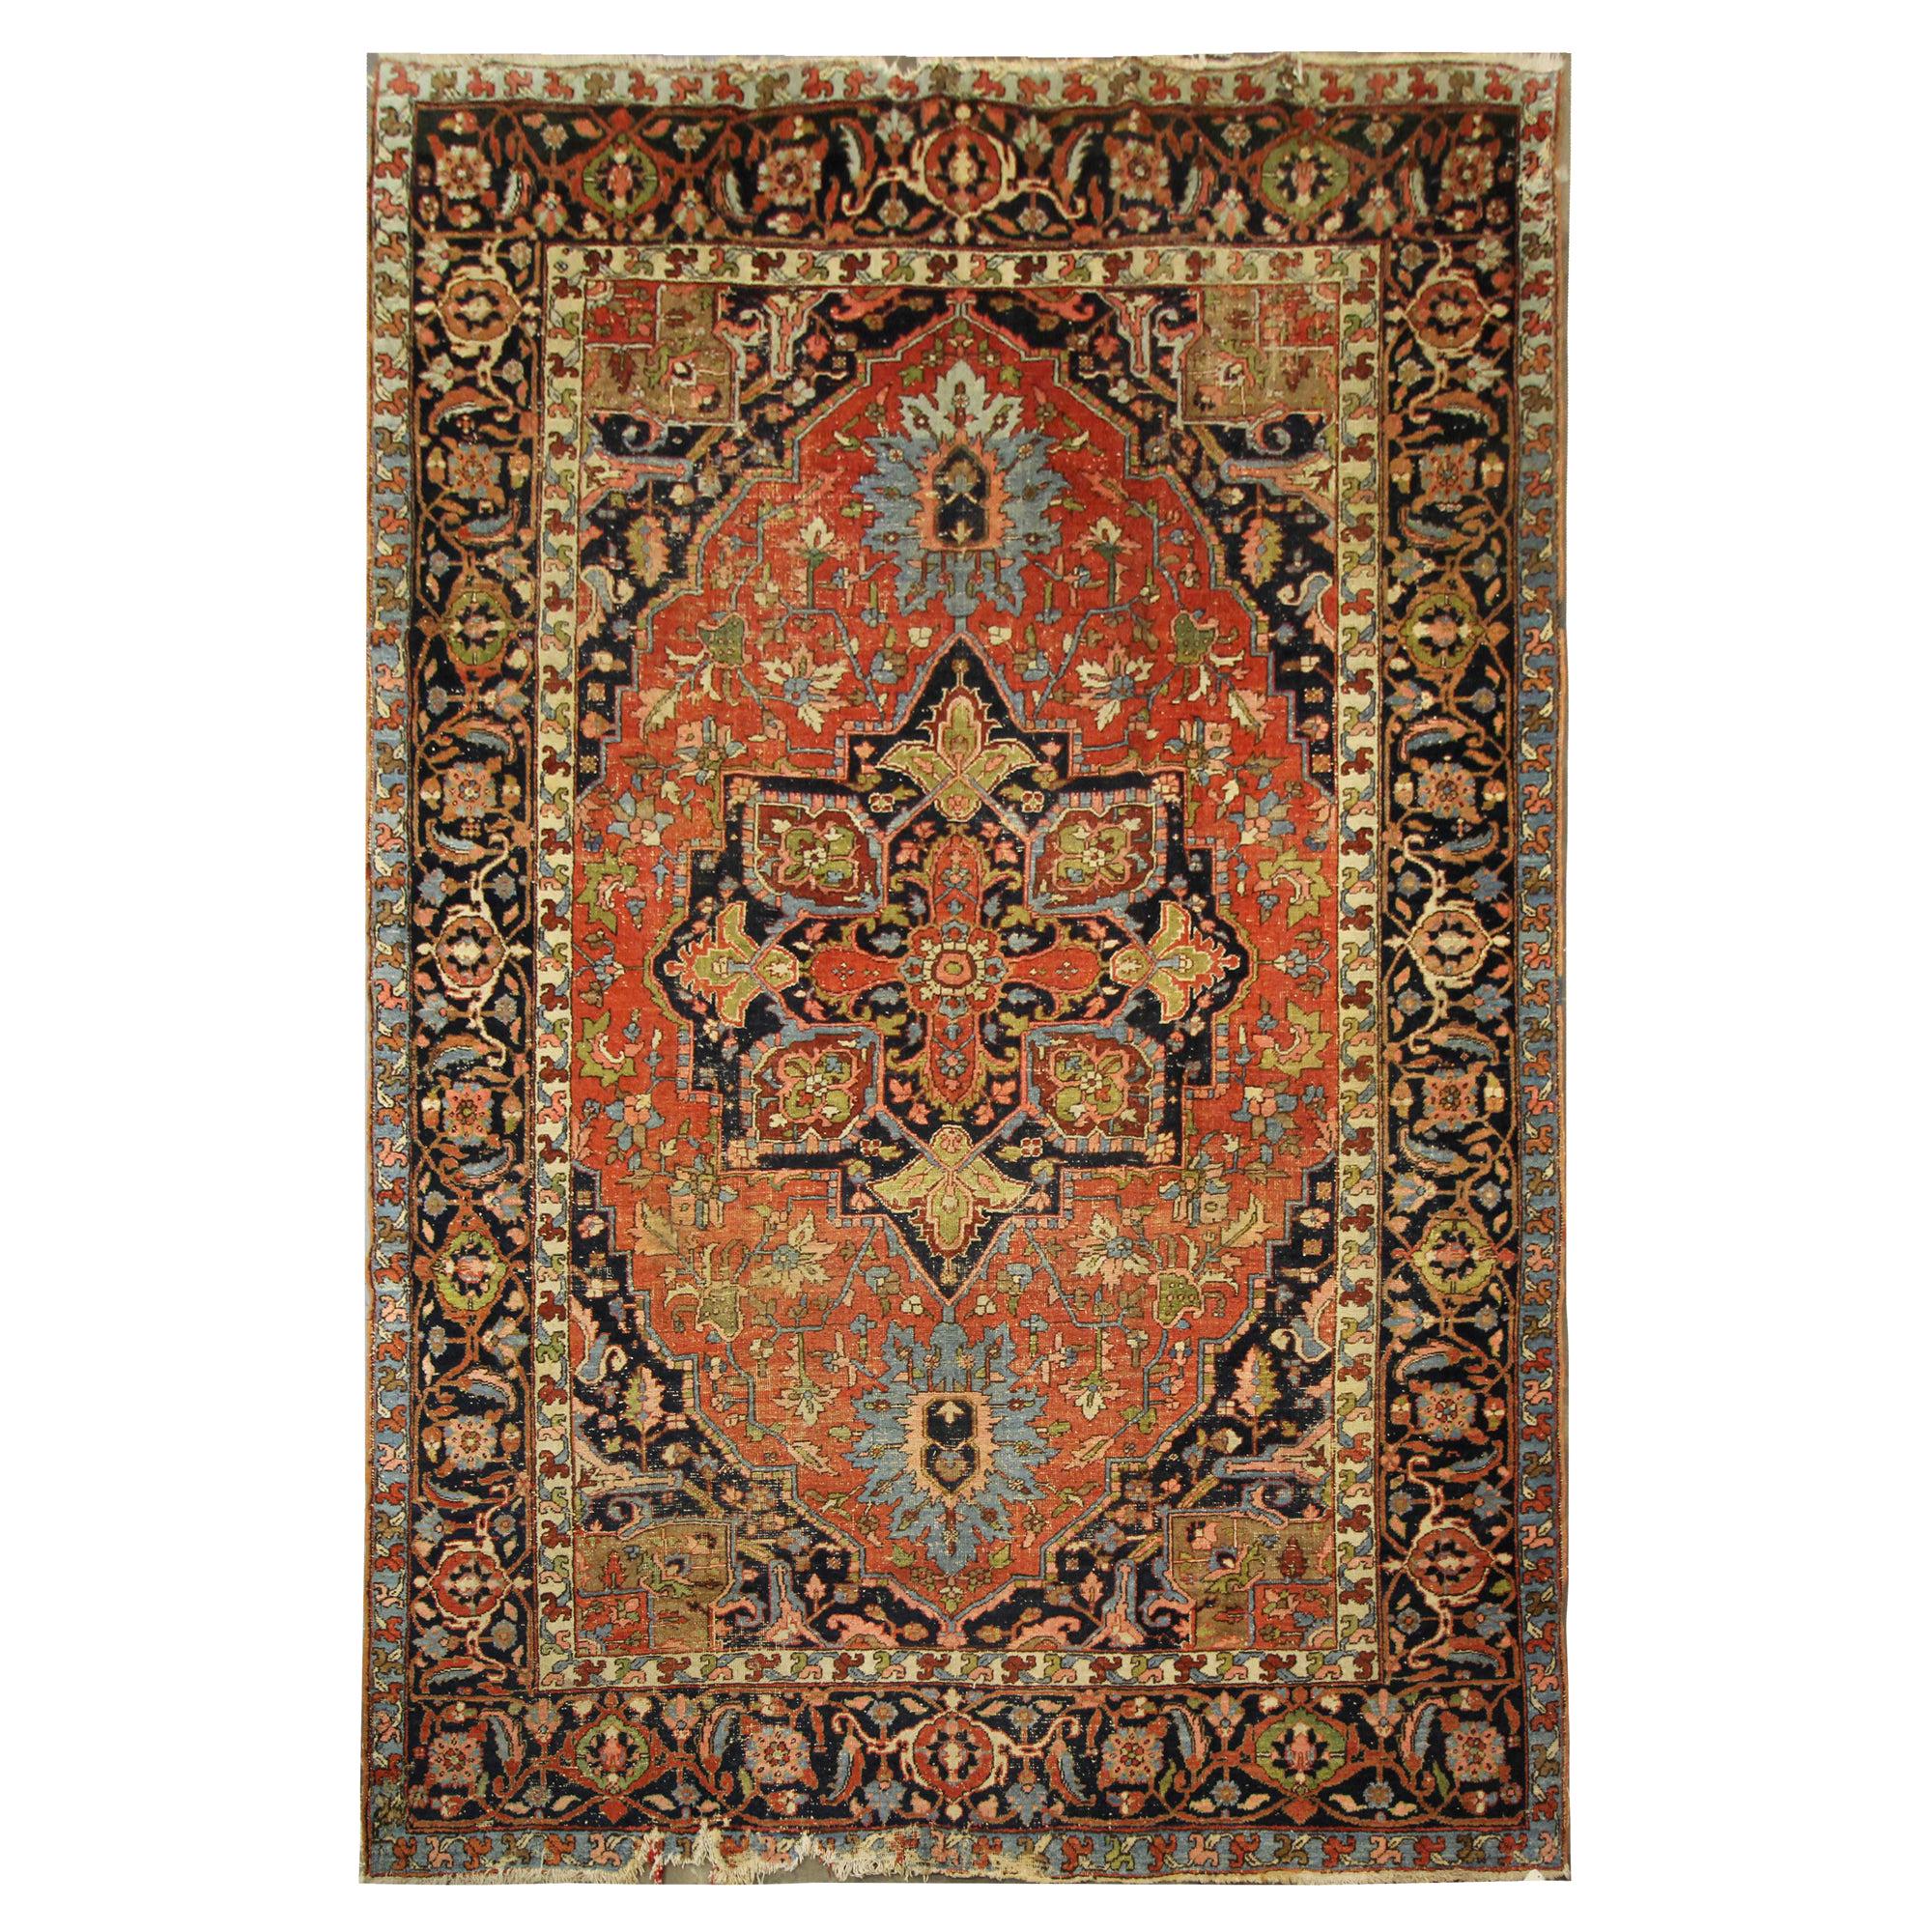 Large Antique Rugs Oriental Carpet Handwoven Traditional  Wool For Sale